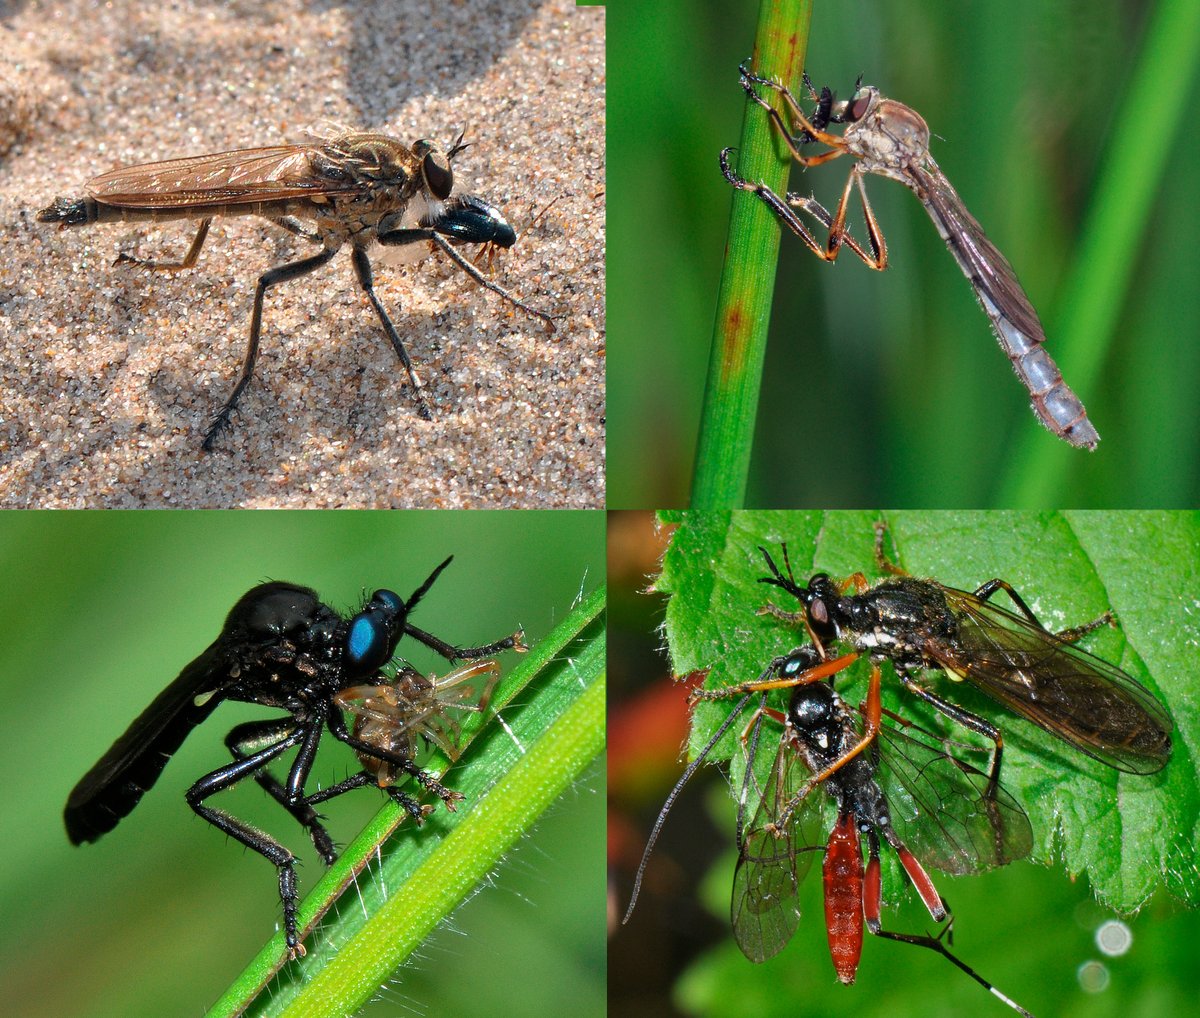 Bon appetit - we'll be getting our teeth into the layout of the Asilidae Robberfly pages soon for our new Guide to #FliesofBritainandIreland @gailashton @flygirlNHM @Ecoentogeek @StevenFalk1 @DipteristsForum @BBOWT